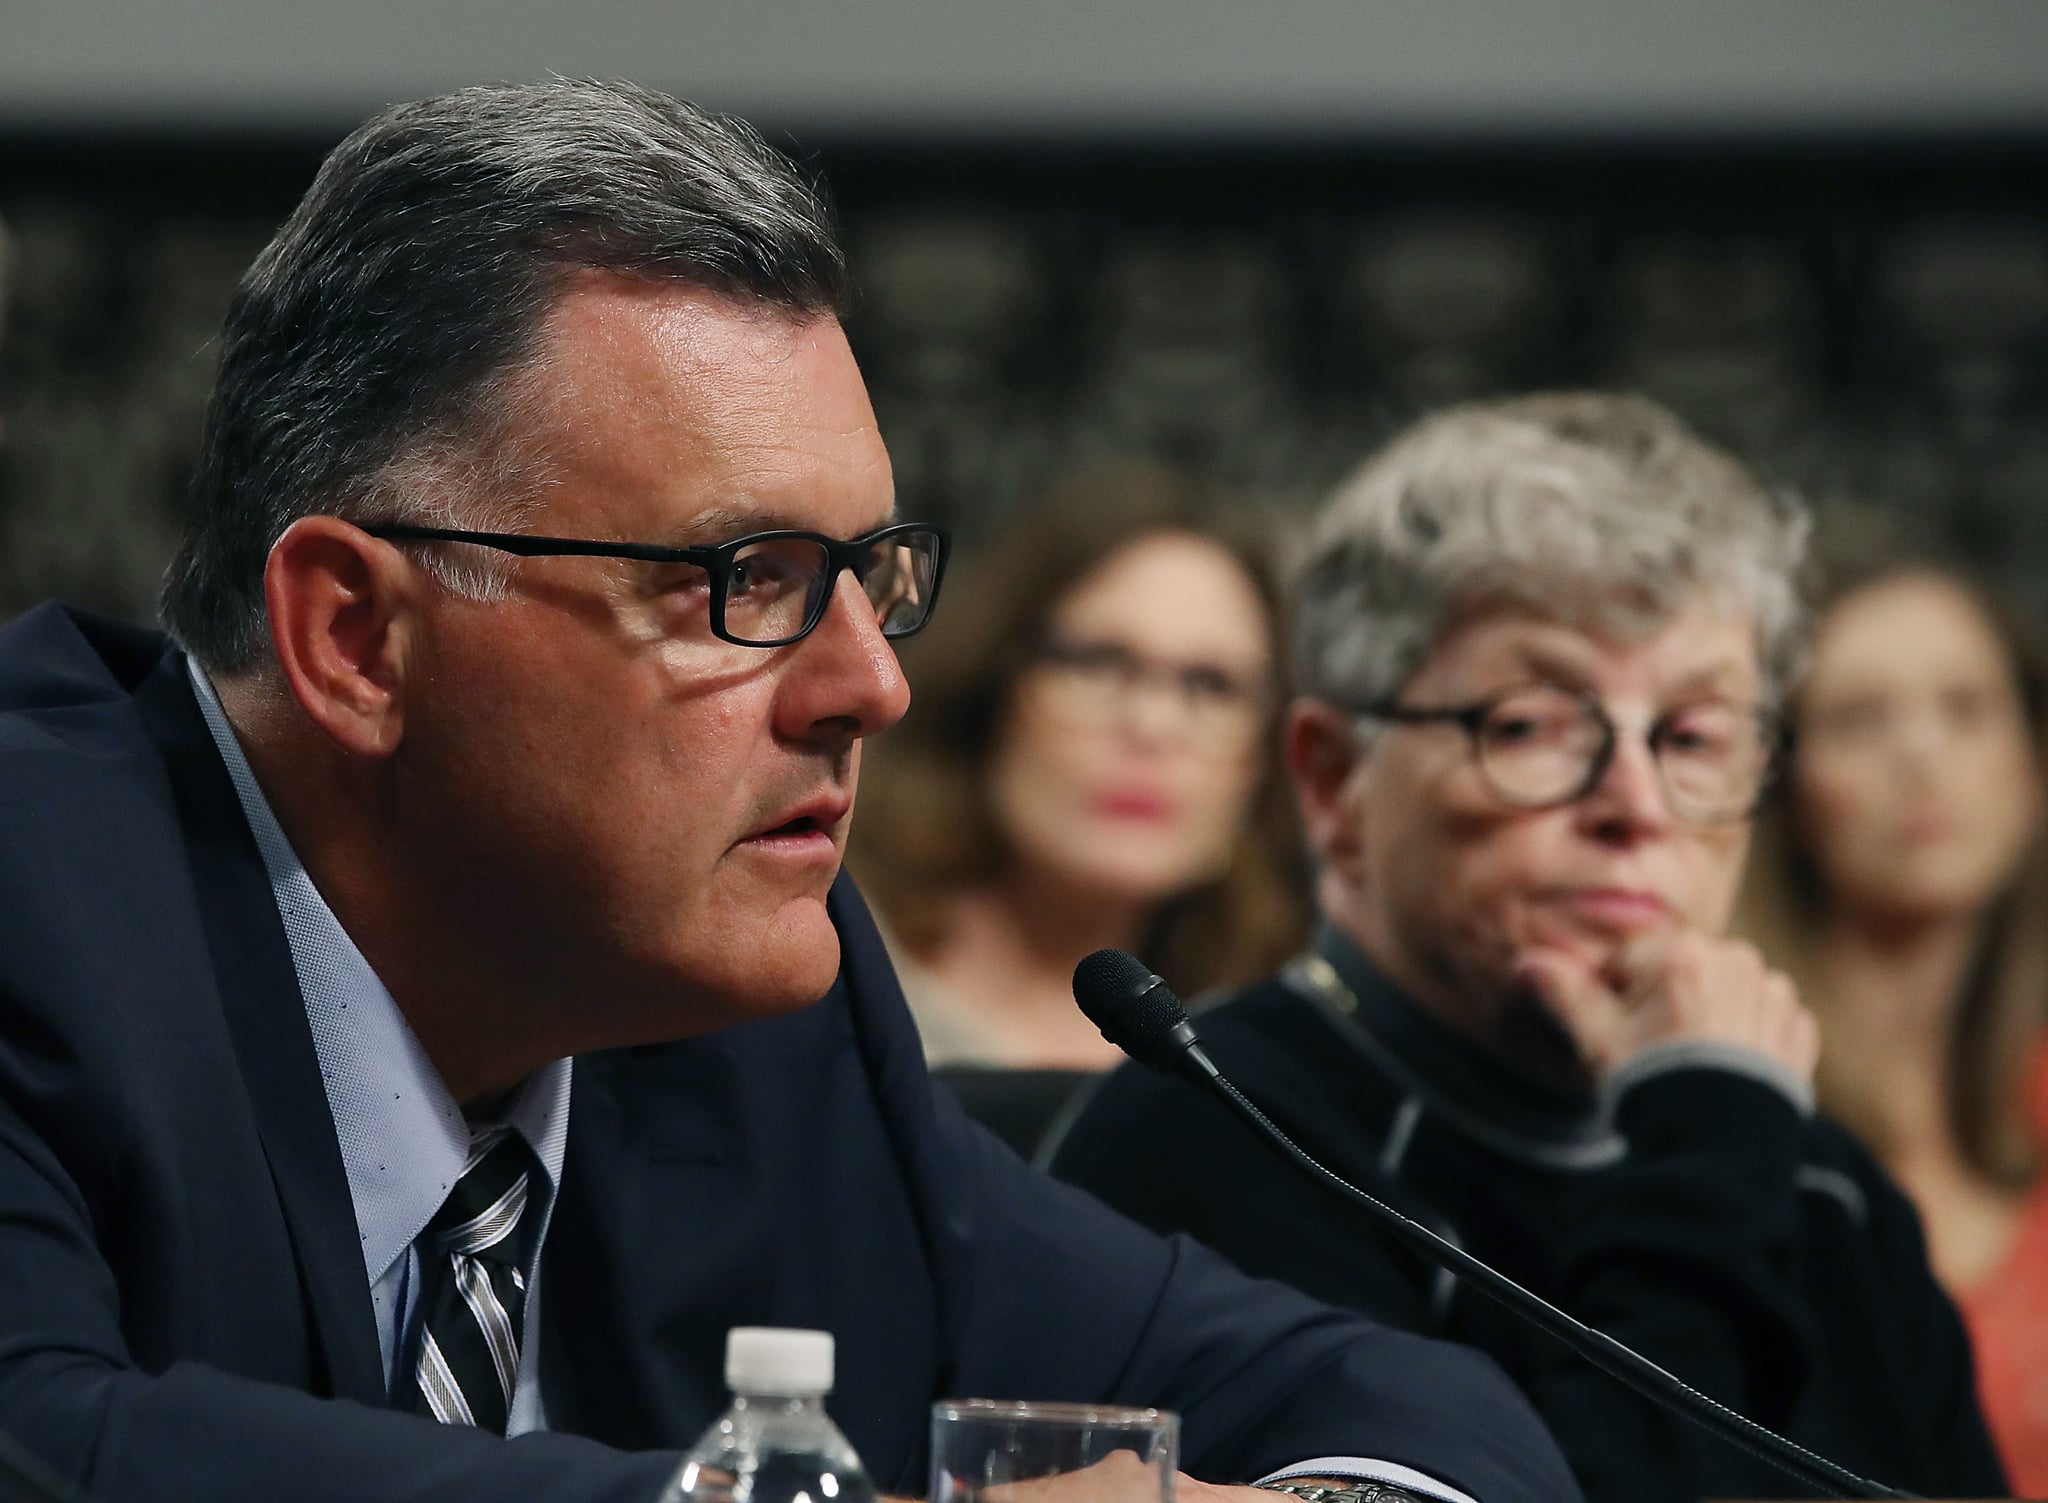 WASHINGTON, DC - JUNE 05: Steve Penny, former president of USA Gymnastics, pleads the Fifth, while seated next to Lou Anna Simon,(R), former president of Michigan State University, during a Senate Commerce, Science and Transportation Committee hearing, on June 5, 2018 in Washington, DC. The hearing focused on preventing abuse in Olympic and amateur athletics and ensuring a safe and secure environment for athletes.  (Photo by Mark Wilson/Getty Images)